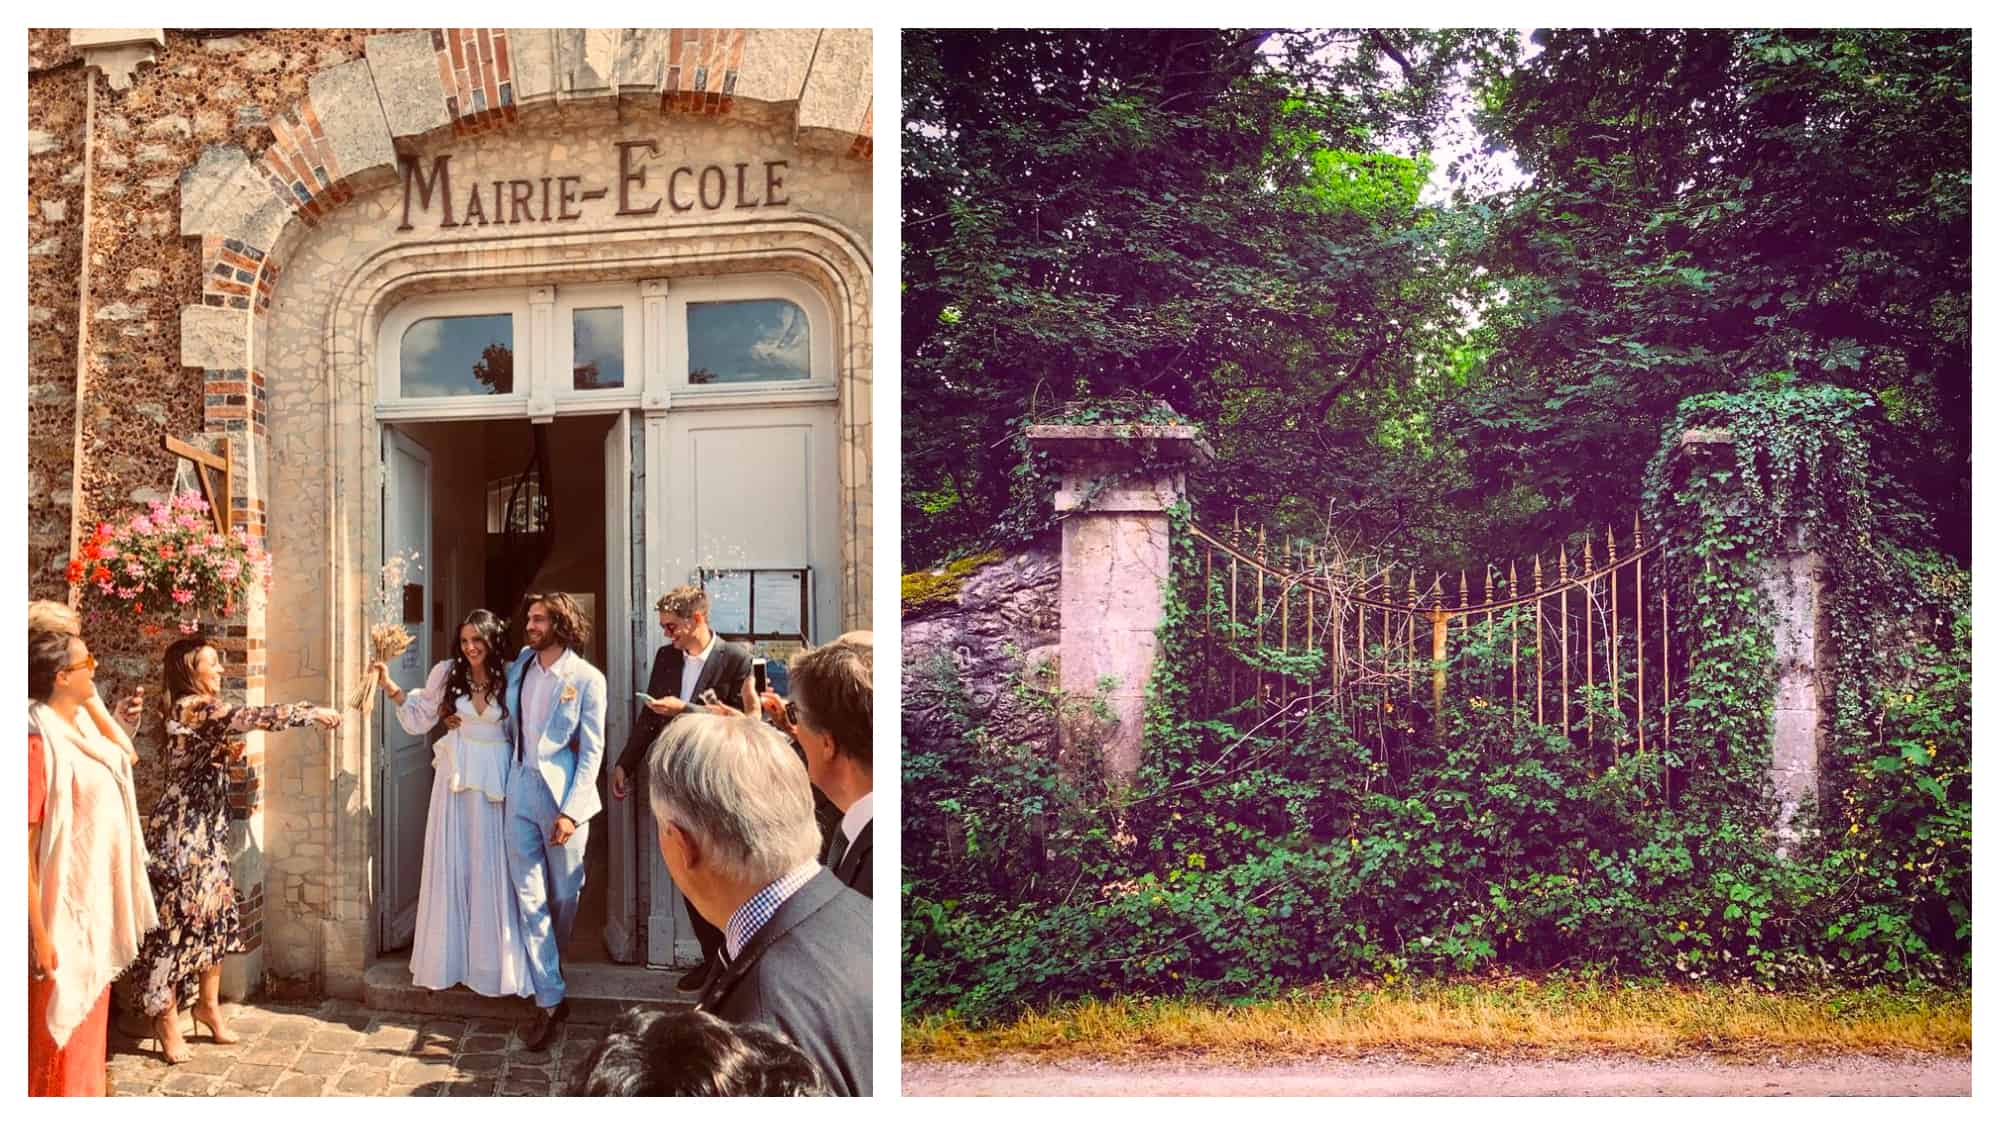 Left: Vanessa Grall, aka Messy Nessy, and her husband at the Mairie on their wedding day, Right: A gate that is overgrown with lush green shrubbery from Messy Nessy's Instagram account